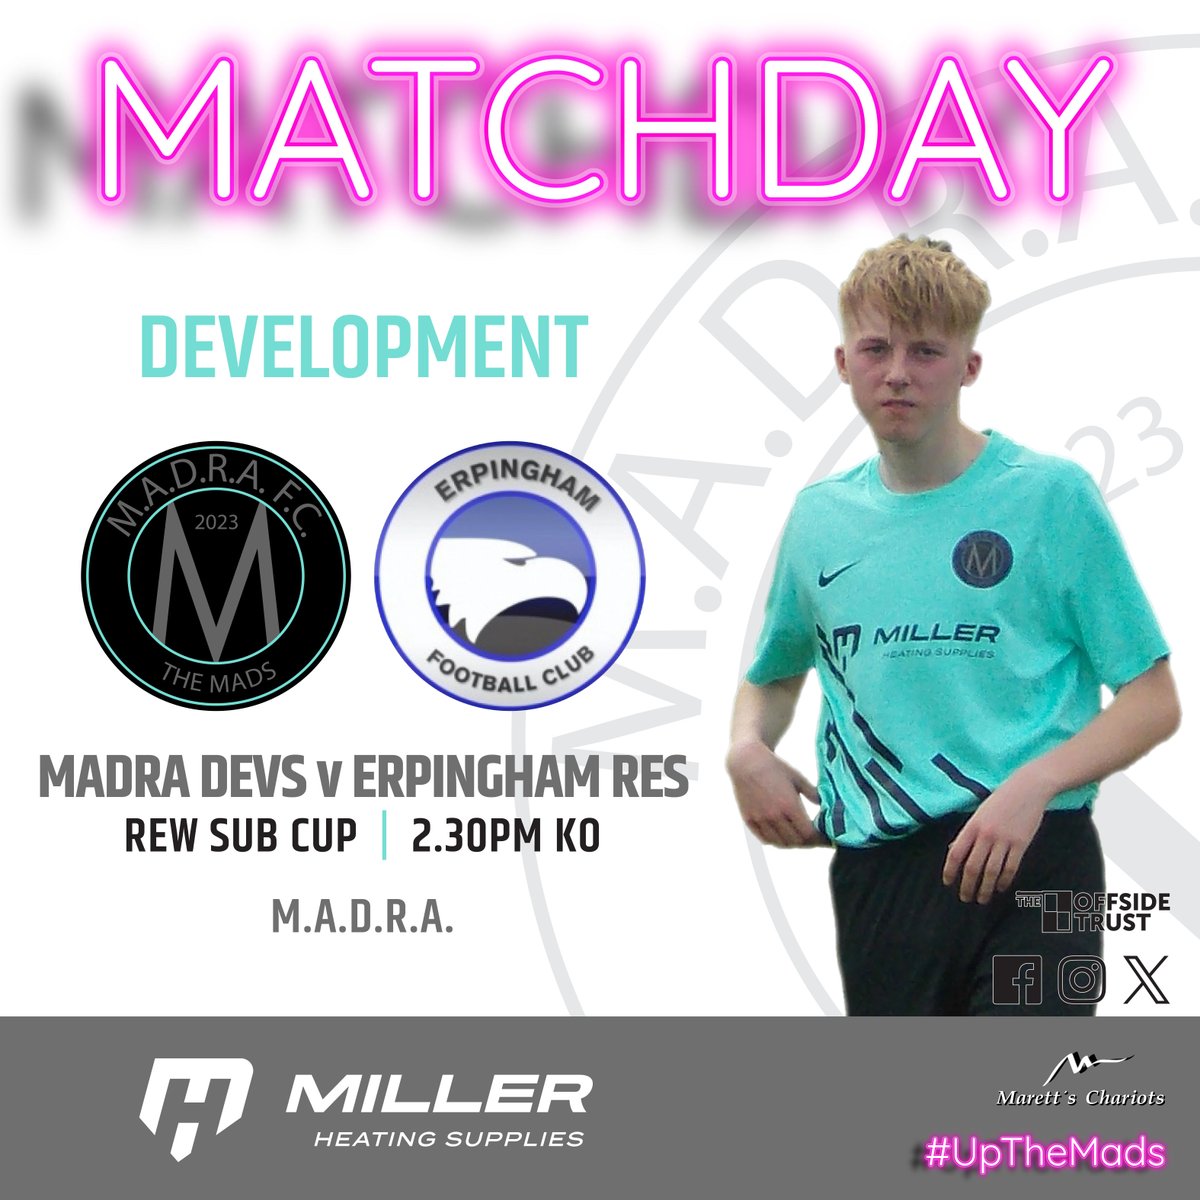 MATCHDAY!
1sts game is off with our opponents unable to raise a side.
Devs welcome Erpingham Reserves.
Bar open from Midday......all support appreciated!
#UpTheMads #WelcomeToTheMadhouse #Madness #TheMads #MadraFC #NorfolkFootball #OneStepBeyond